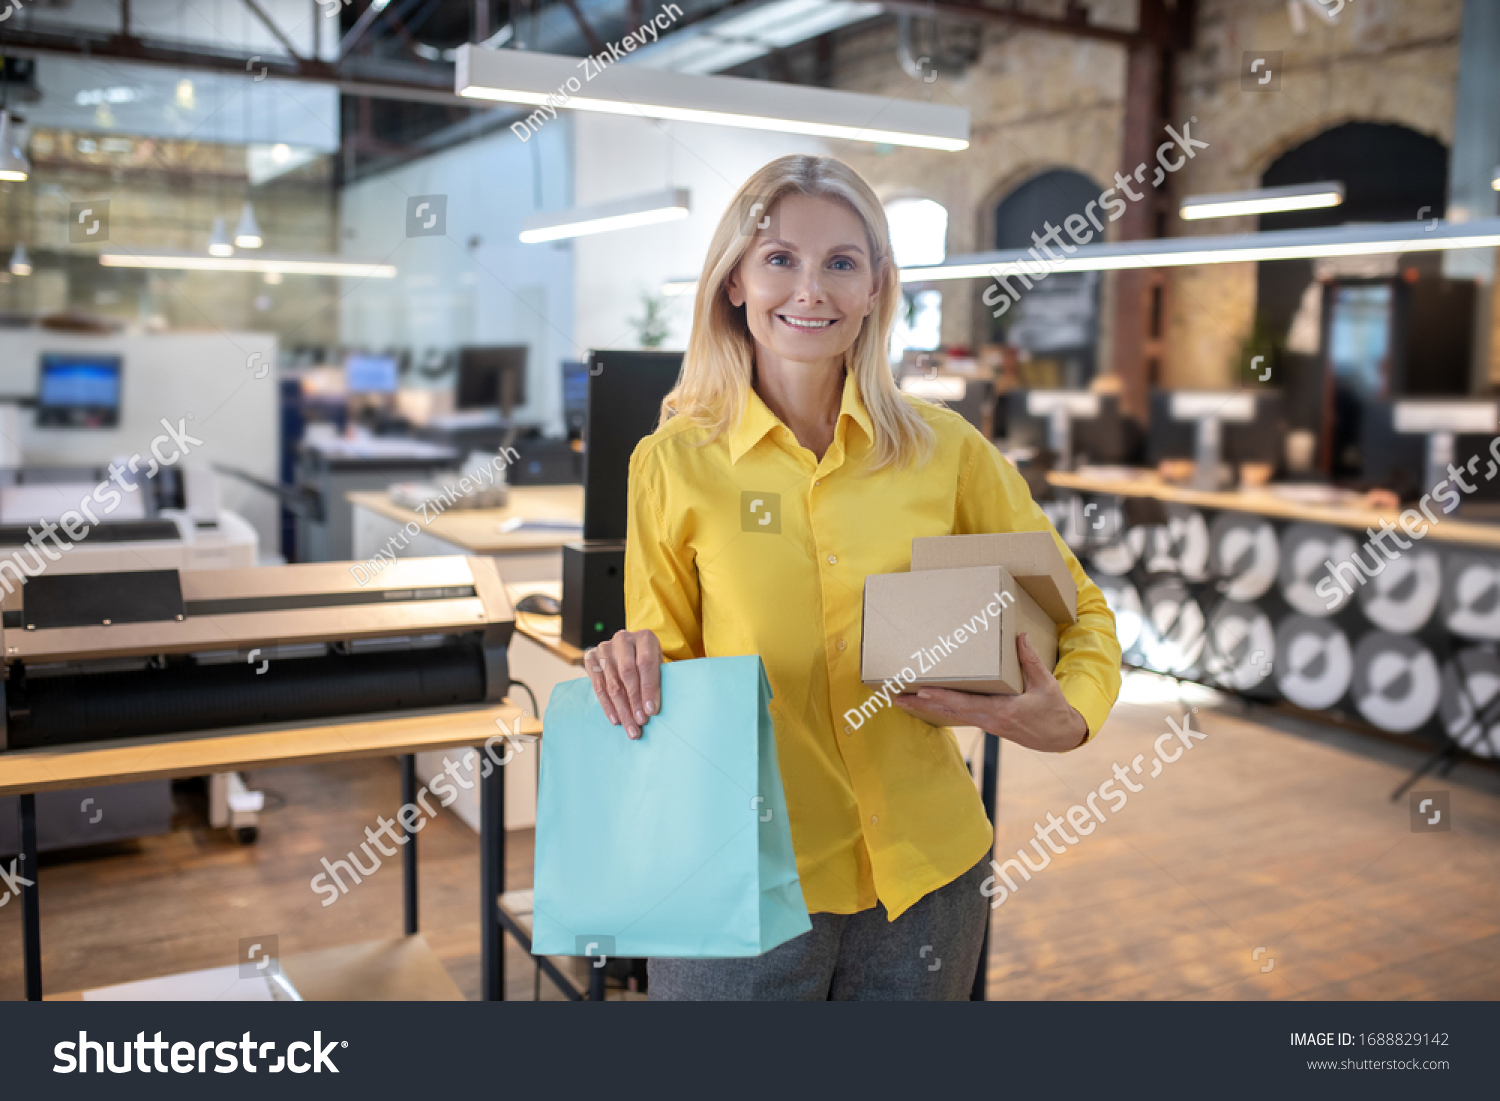 At workshop. Blonde woman holding boxes and paper packege, smiling #1688829142